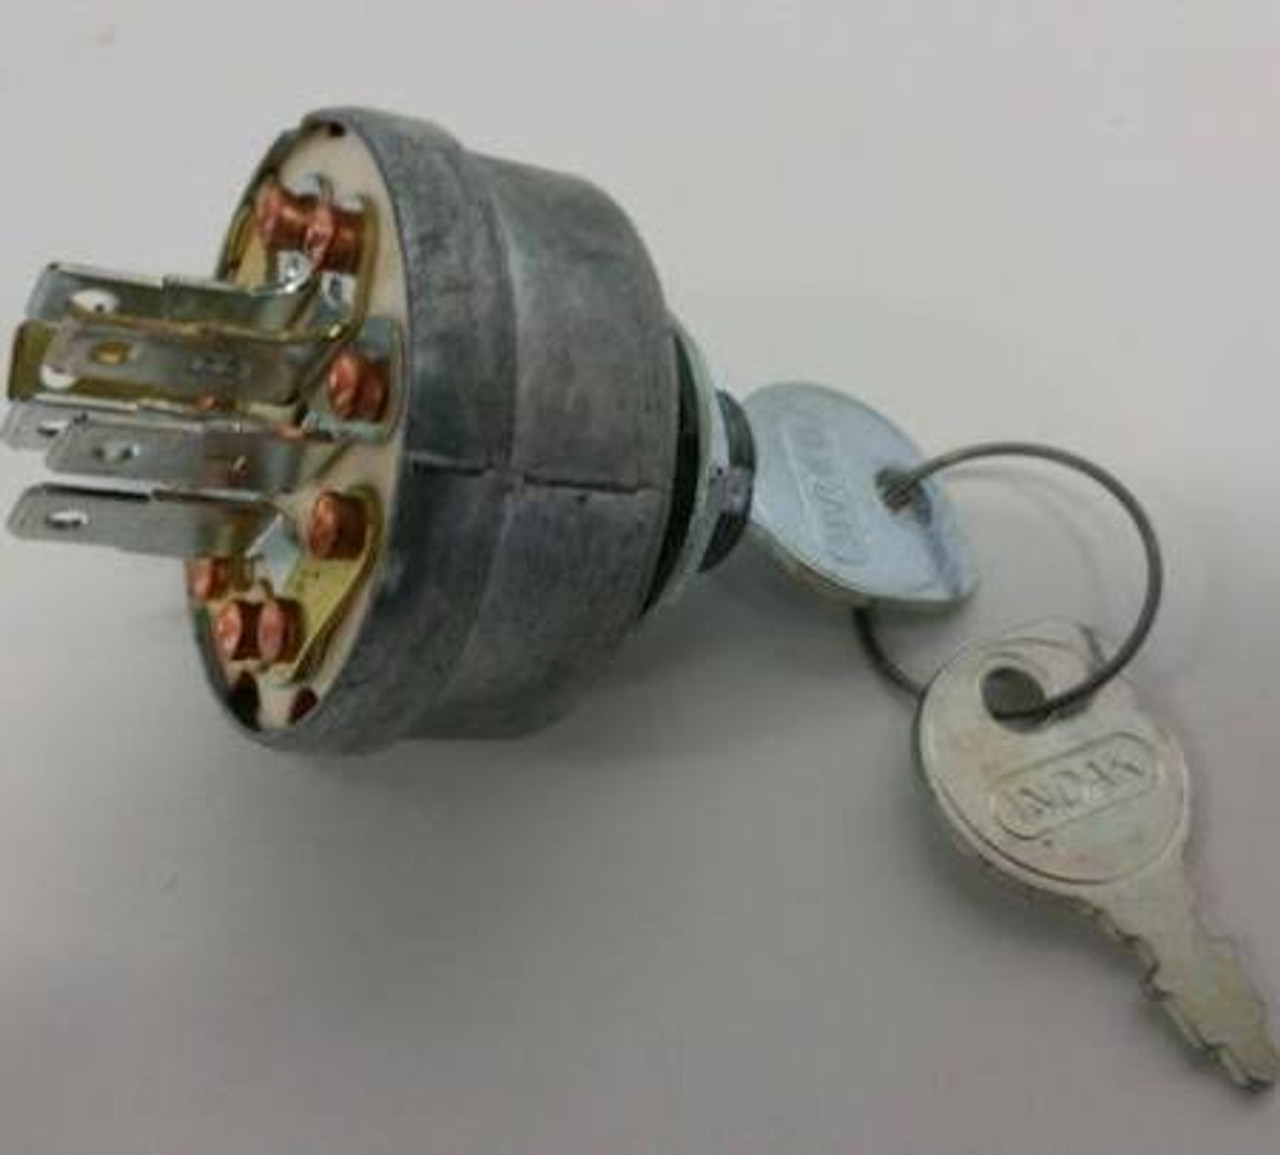 New Ignition Switch fits AYP 146151 or 73232